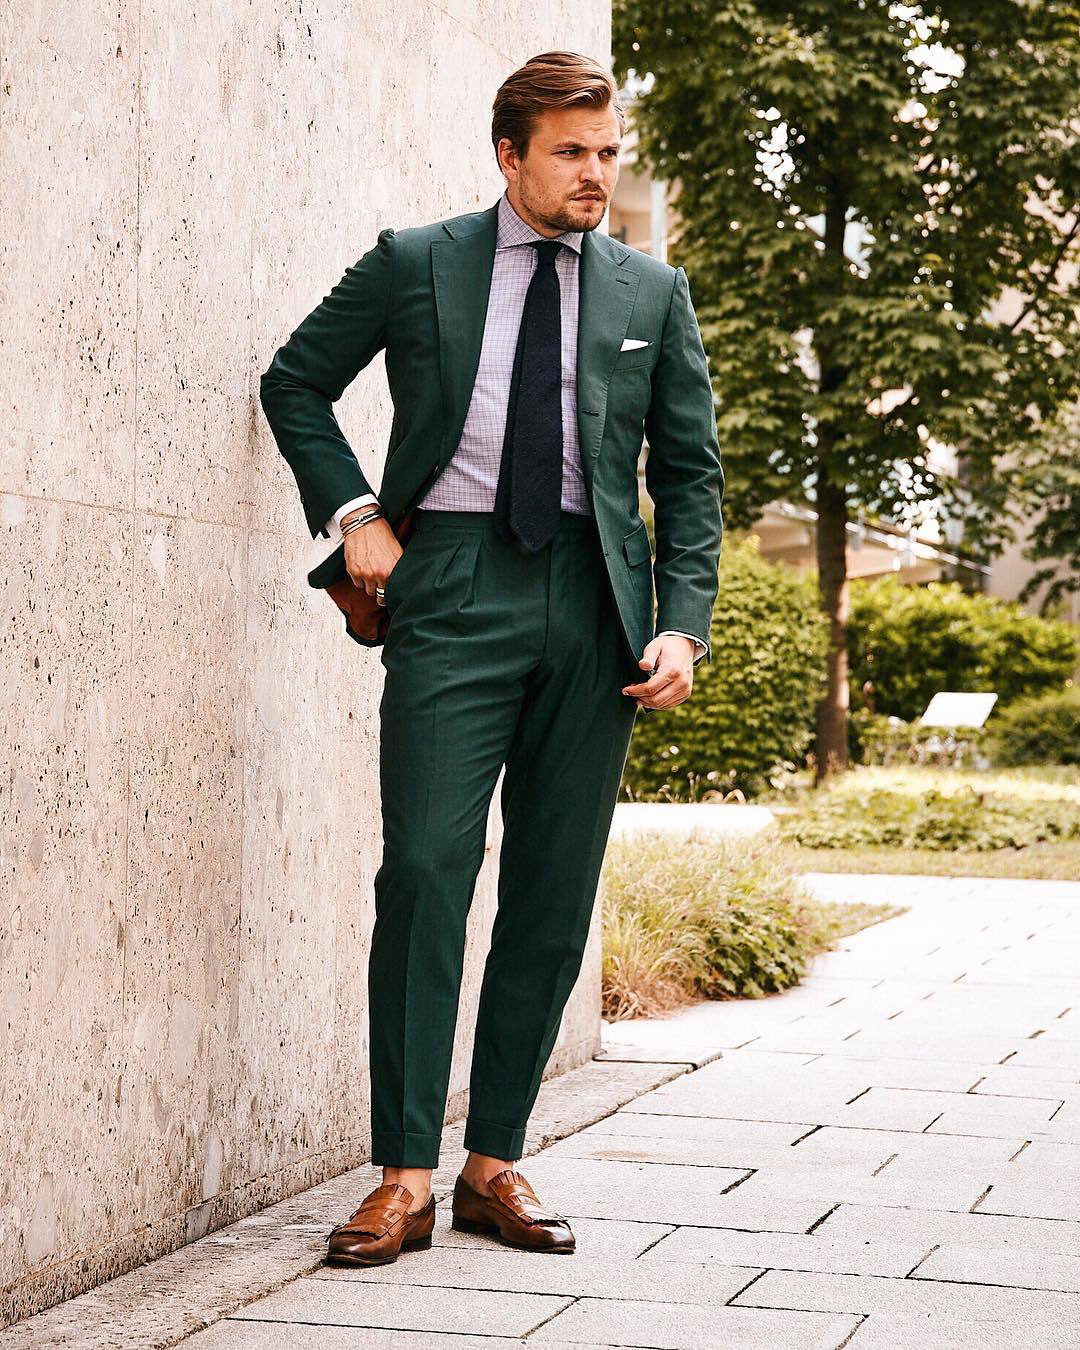 dark green suit, pink patterned shirt, navy tie, and brown loafers